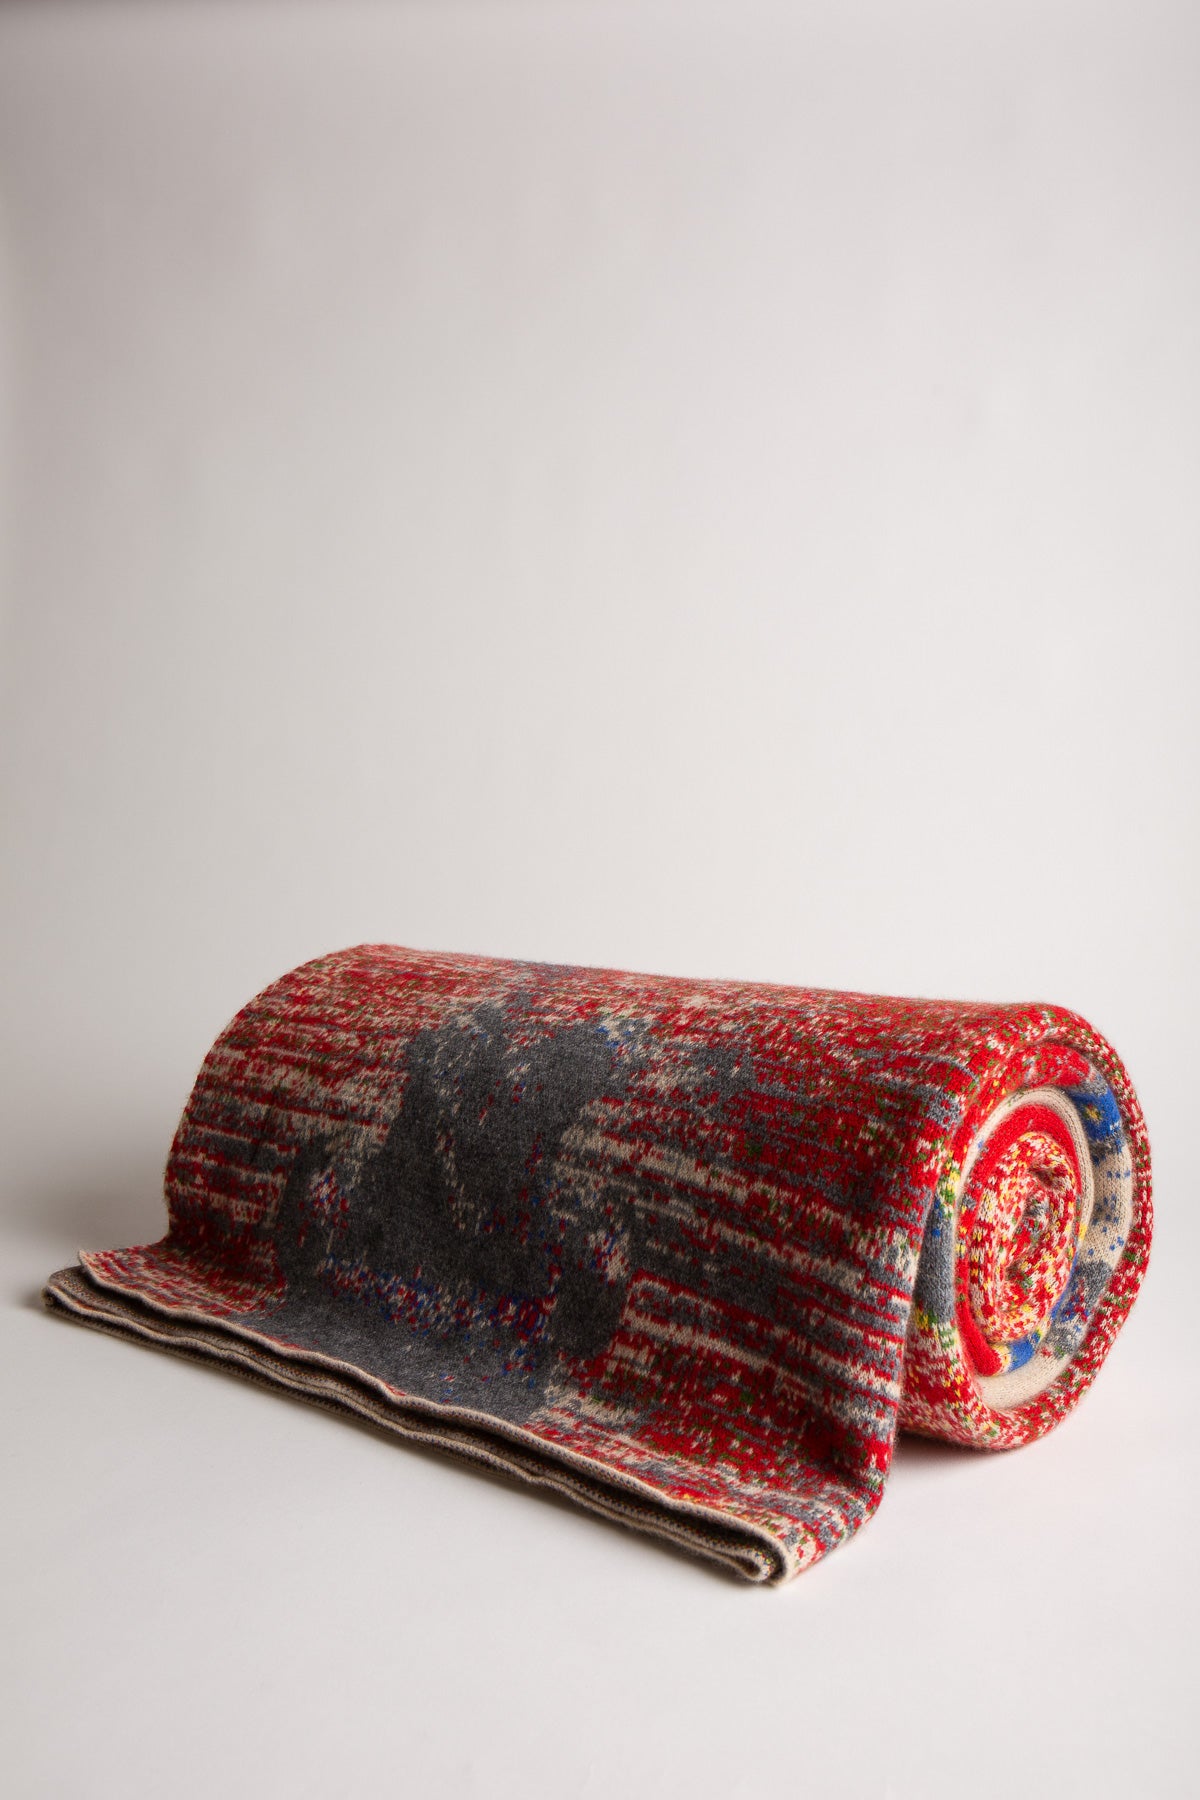 SAVED NEW YORK | RED QUEEN BLANKET